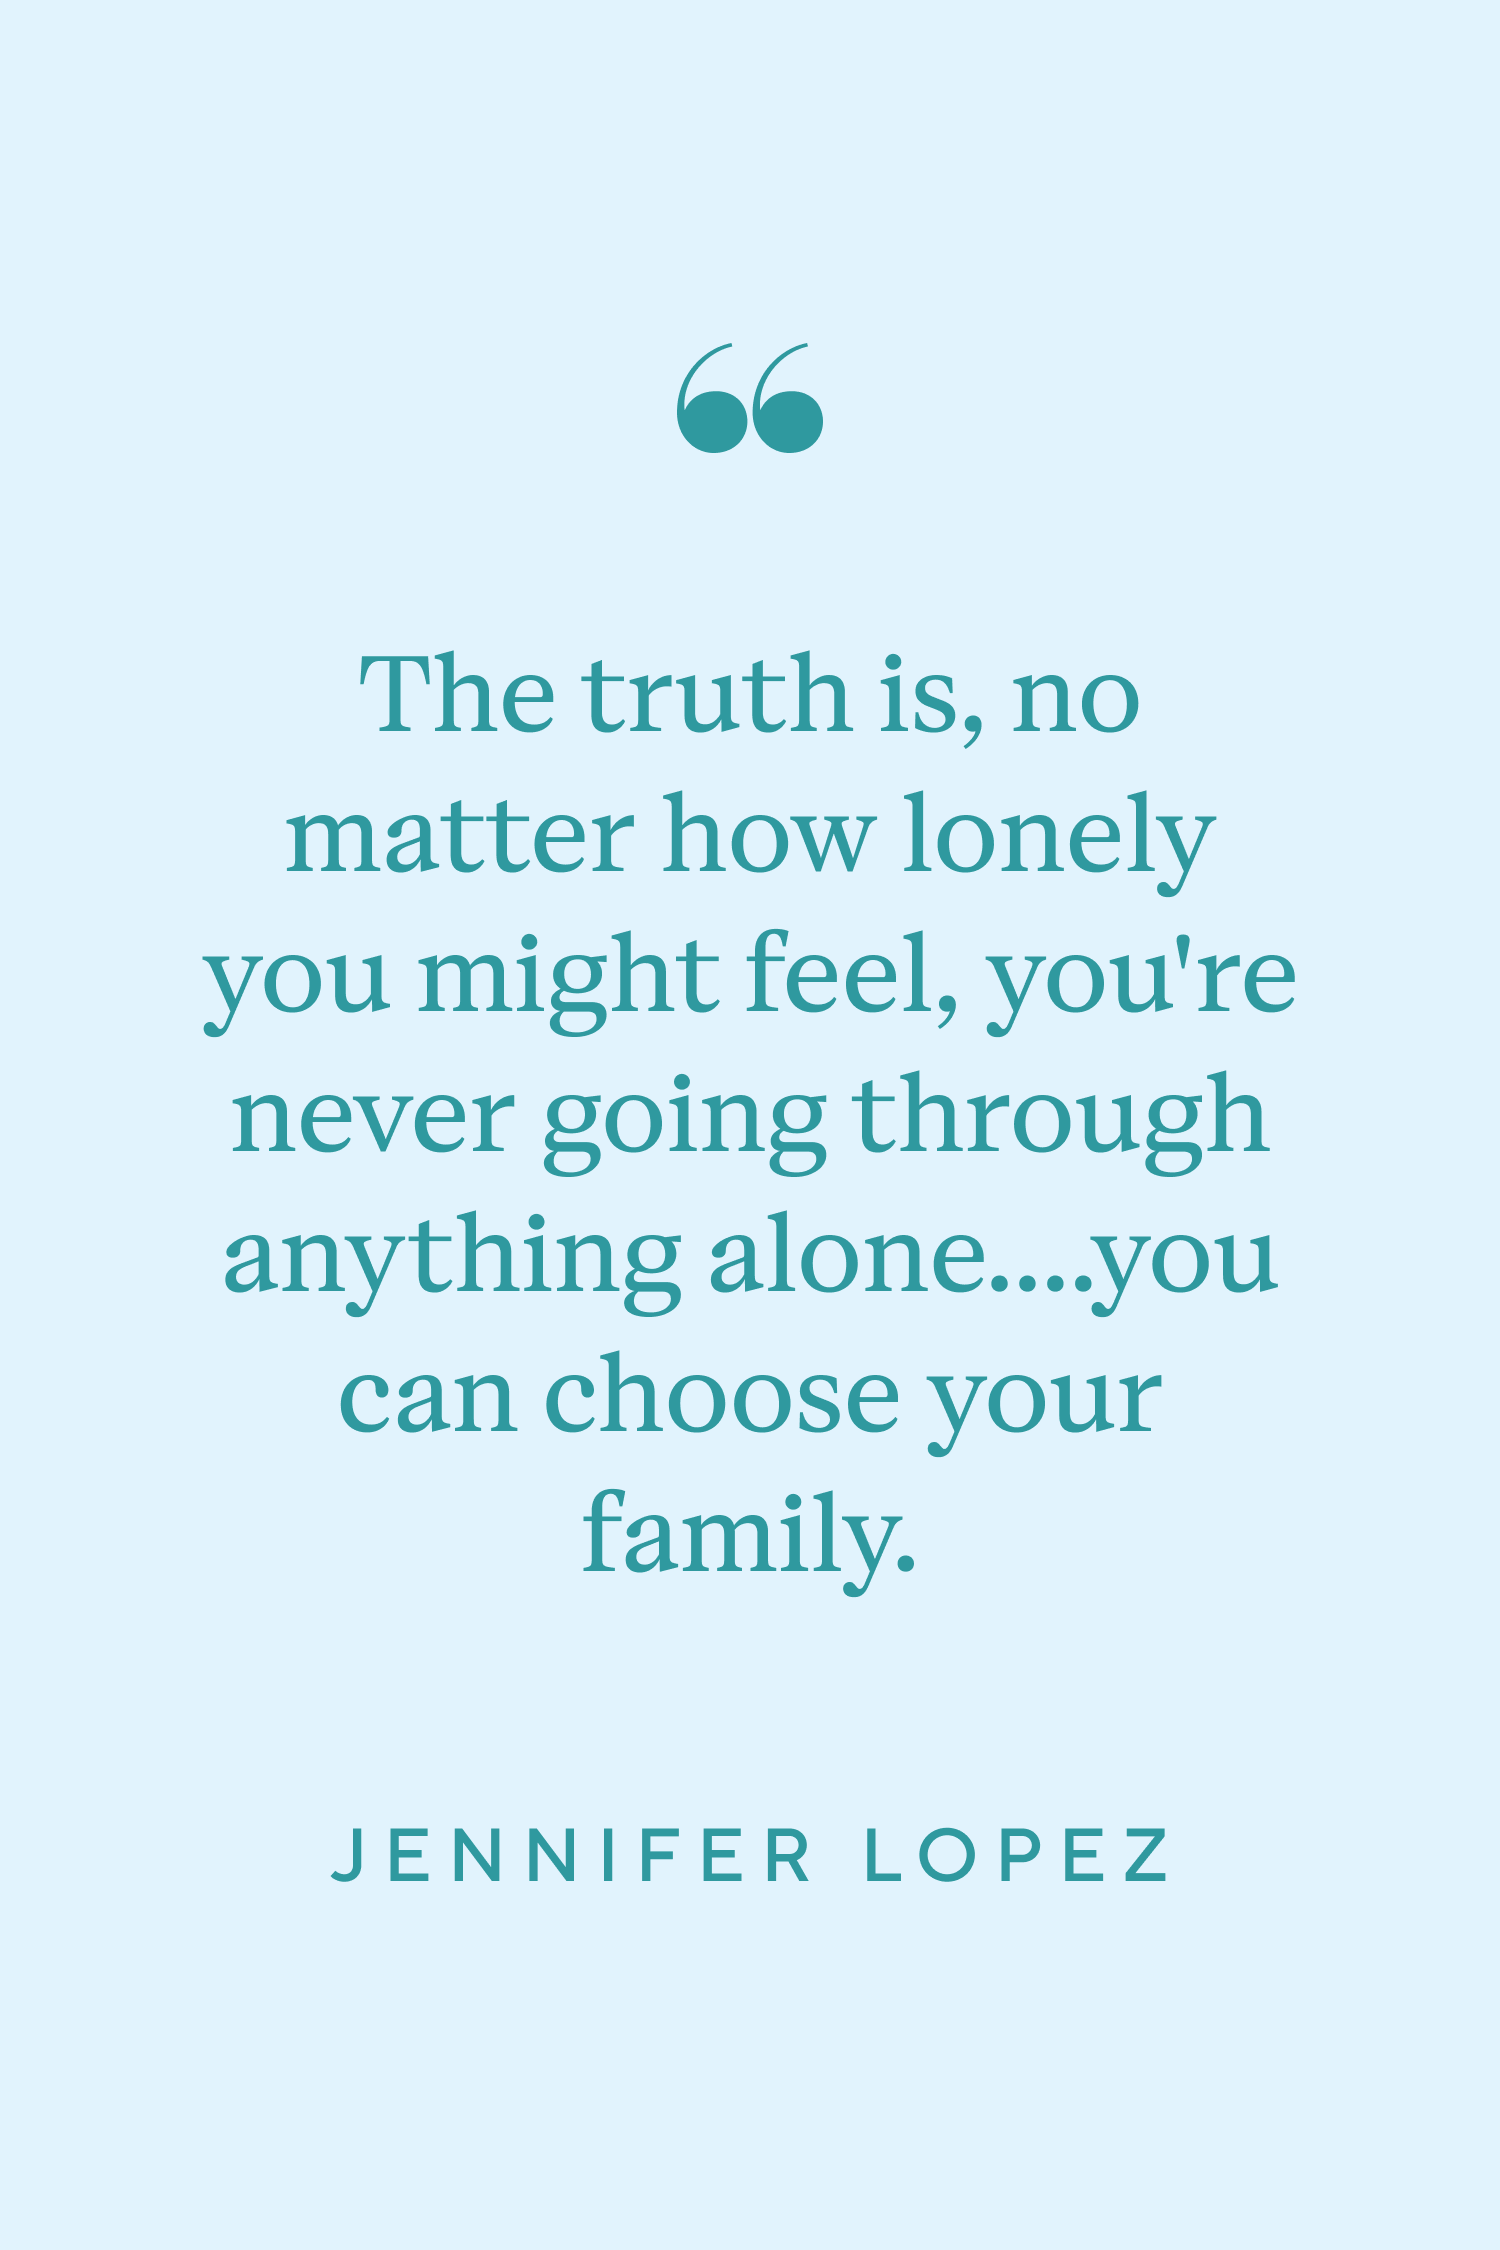 loneliness quotes for friends